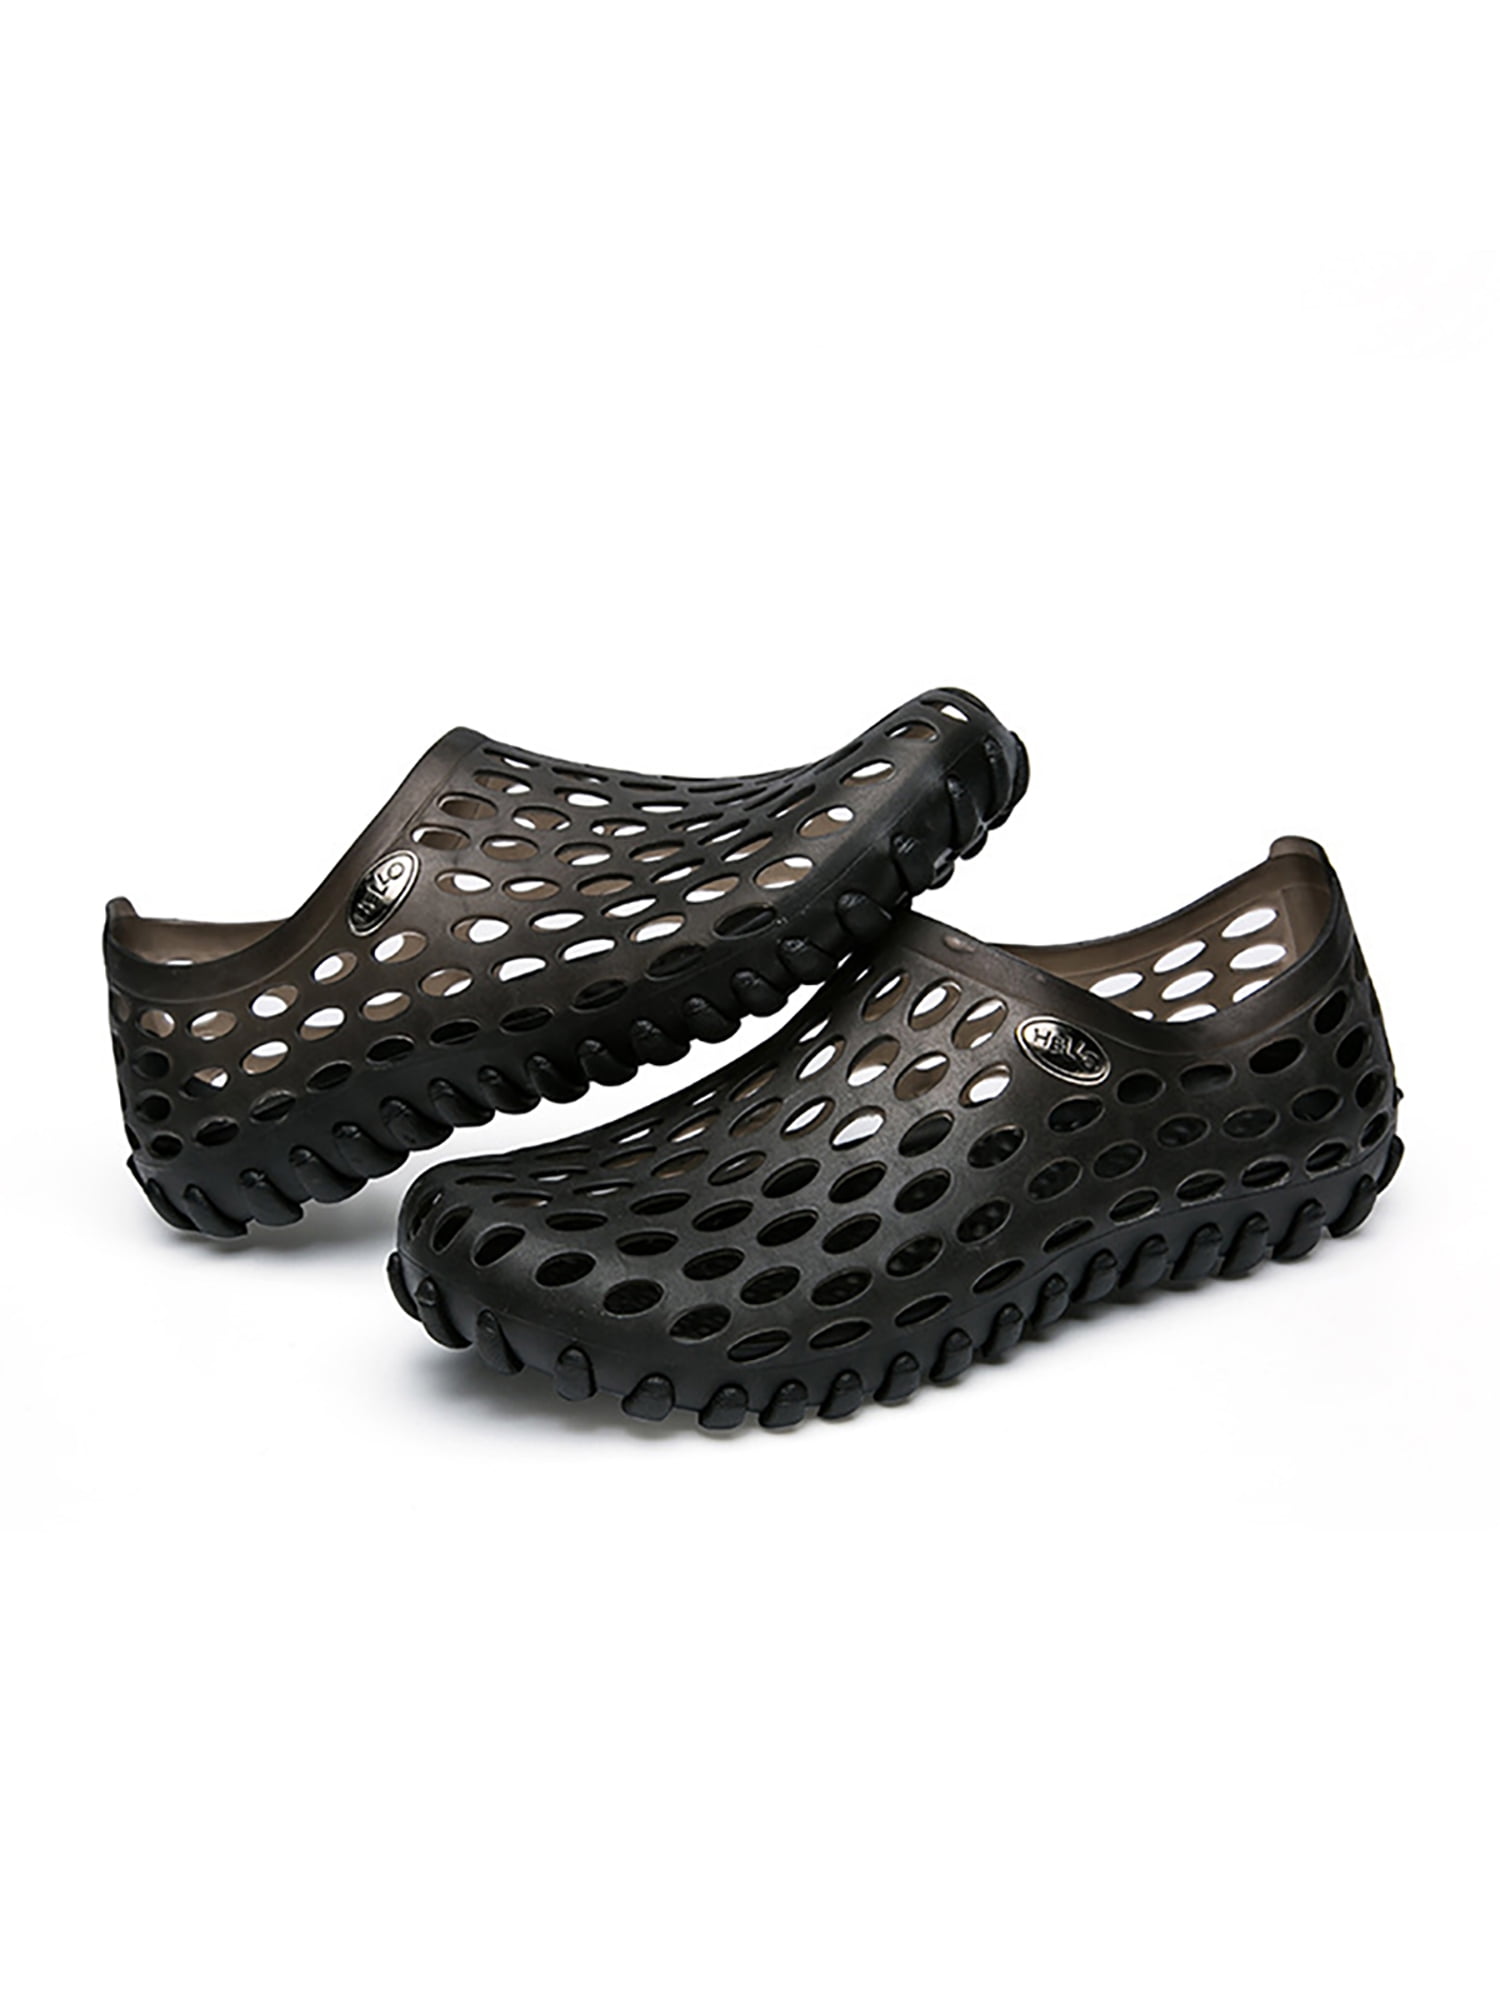 Men's Women's Breathable Slippers Hollow-out Beach Sandals Comfort Hole Shoes